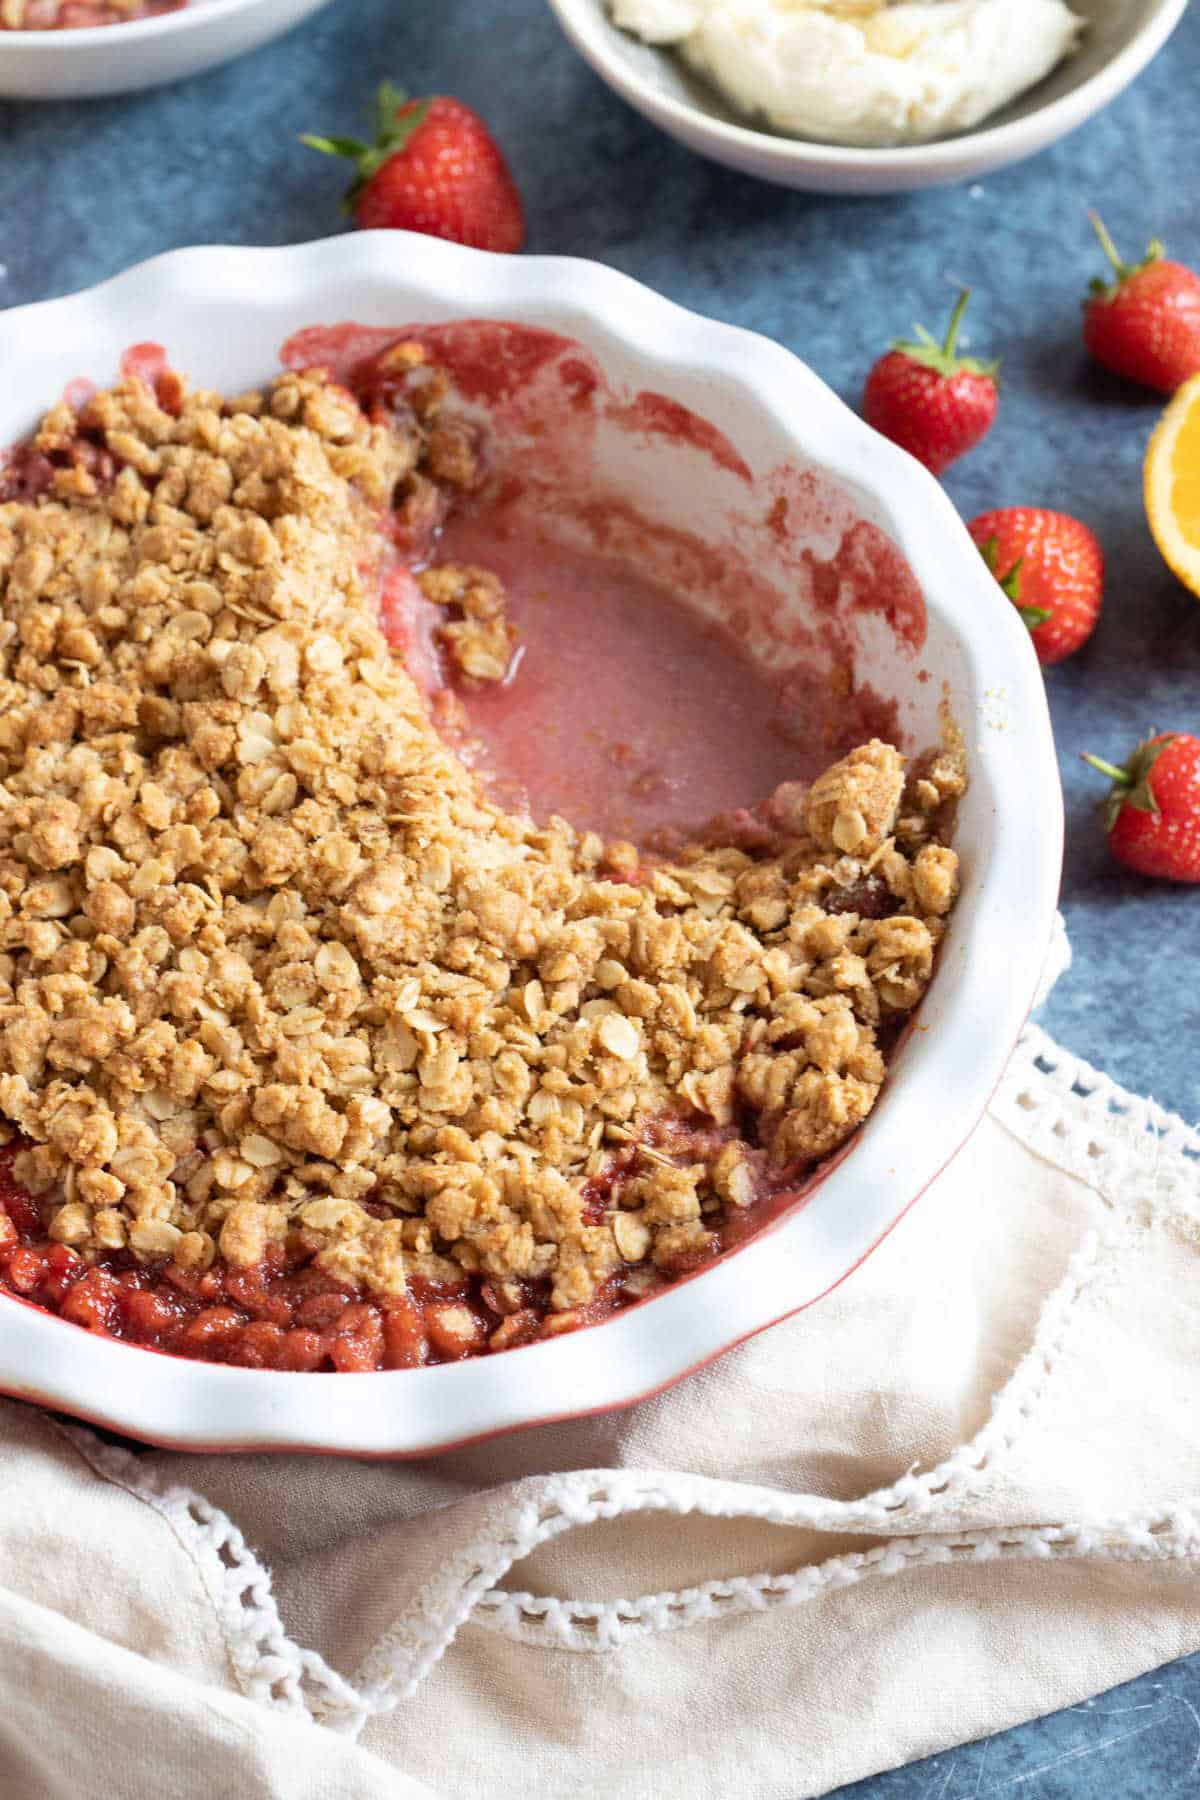 Strawberry crumble in a pie dish with cream.